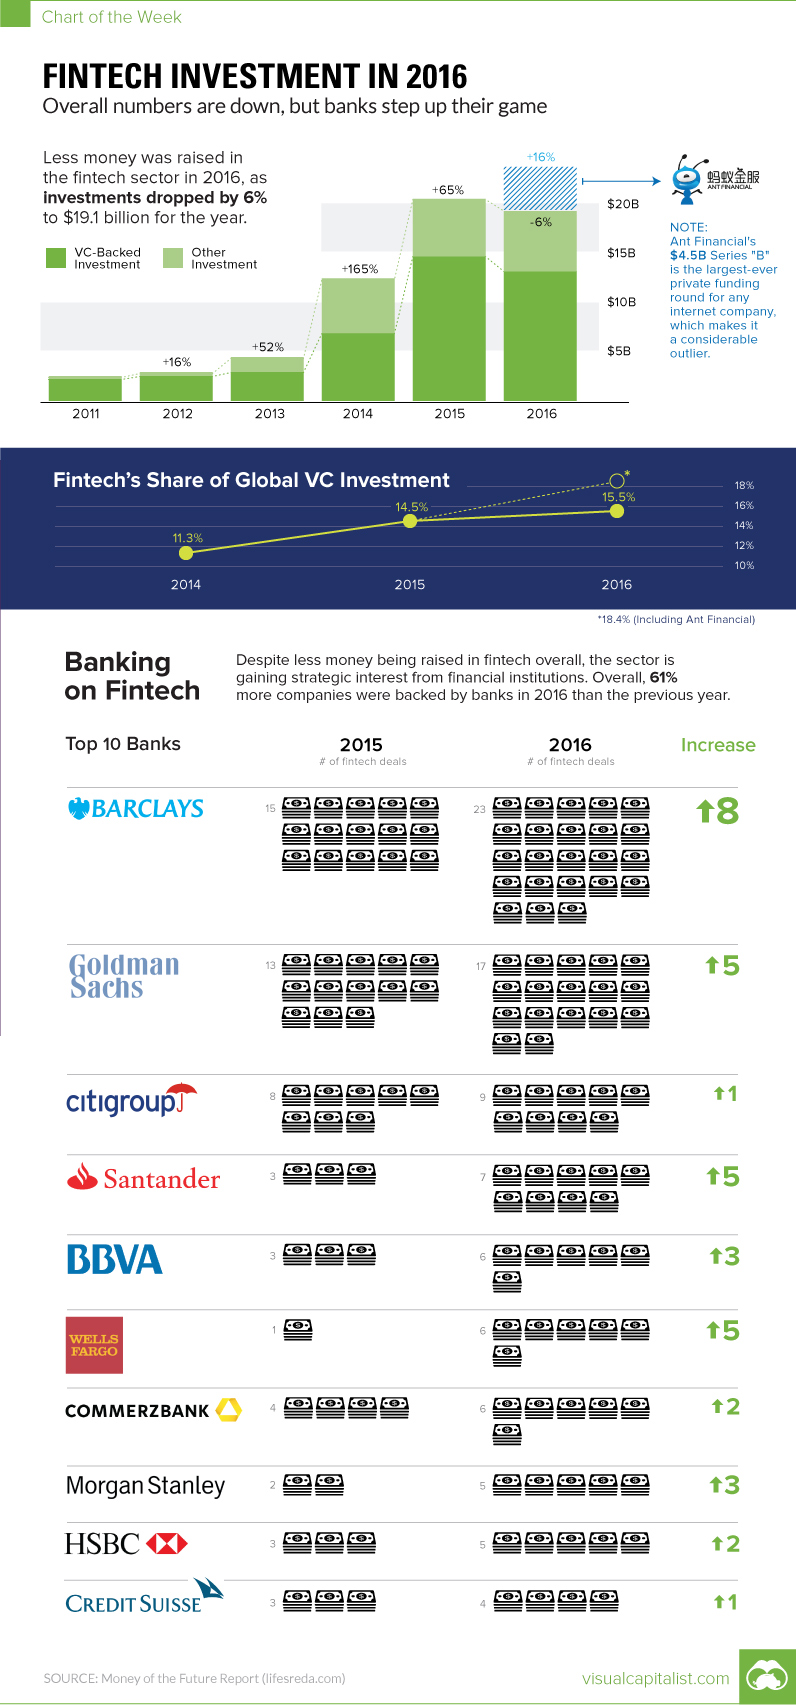 Fintech Investment in 2016